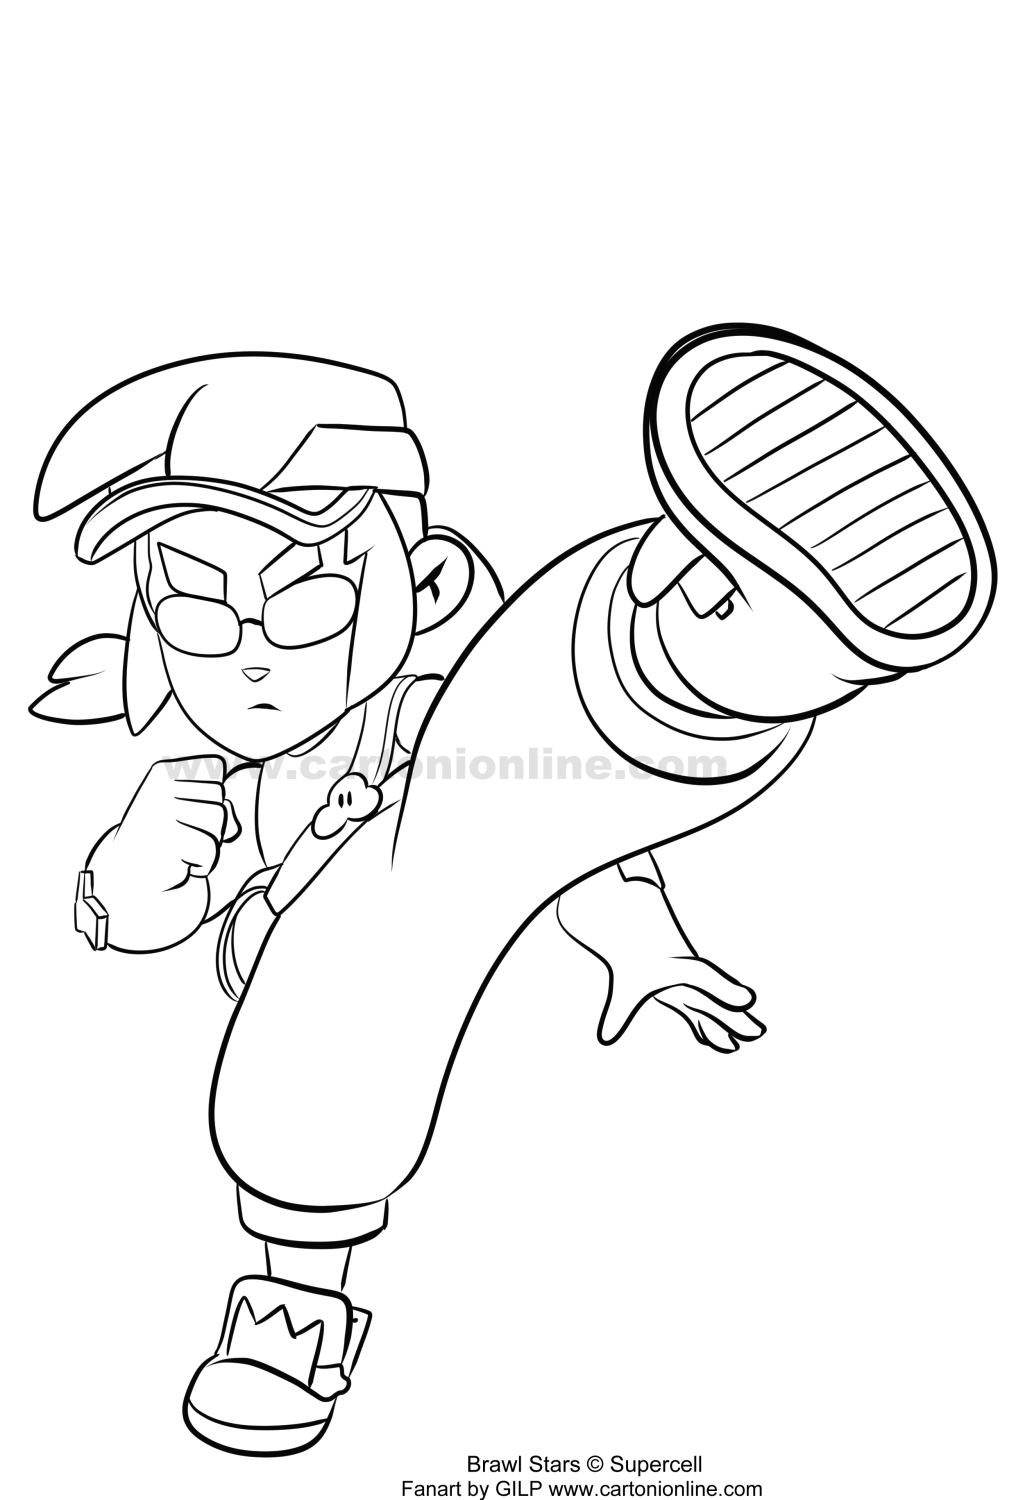 Fang 05 from Brawl Stars coloring page to print and coloring